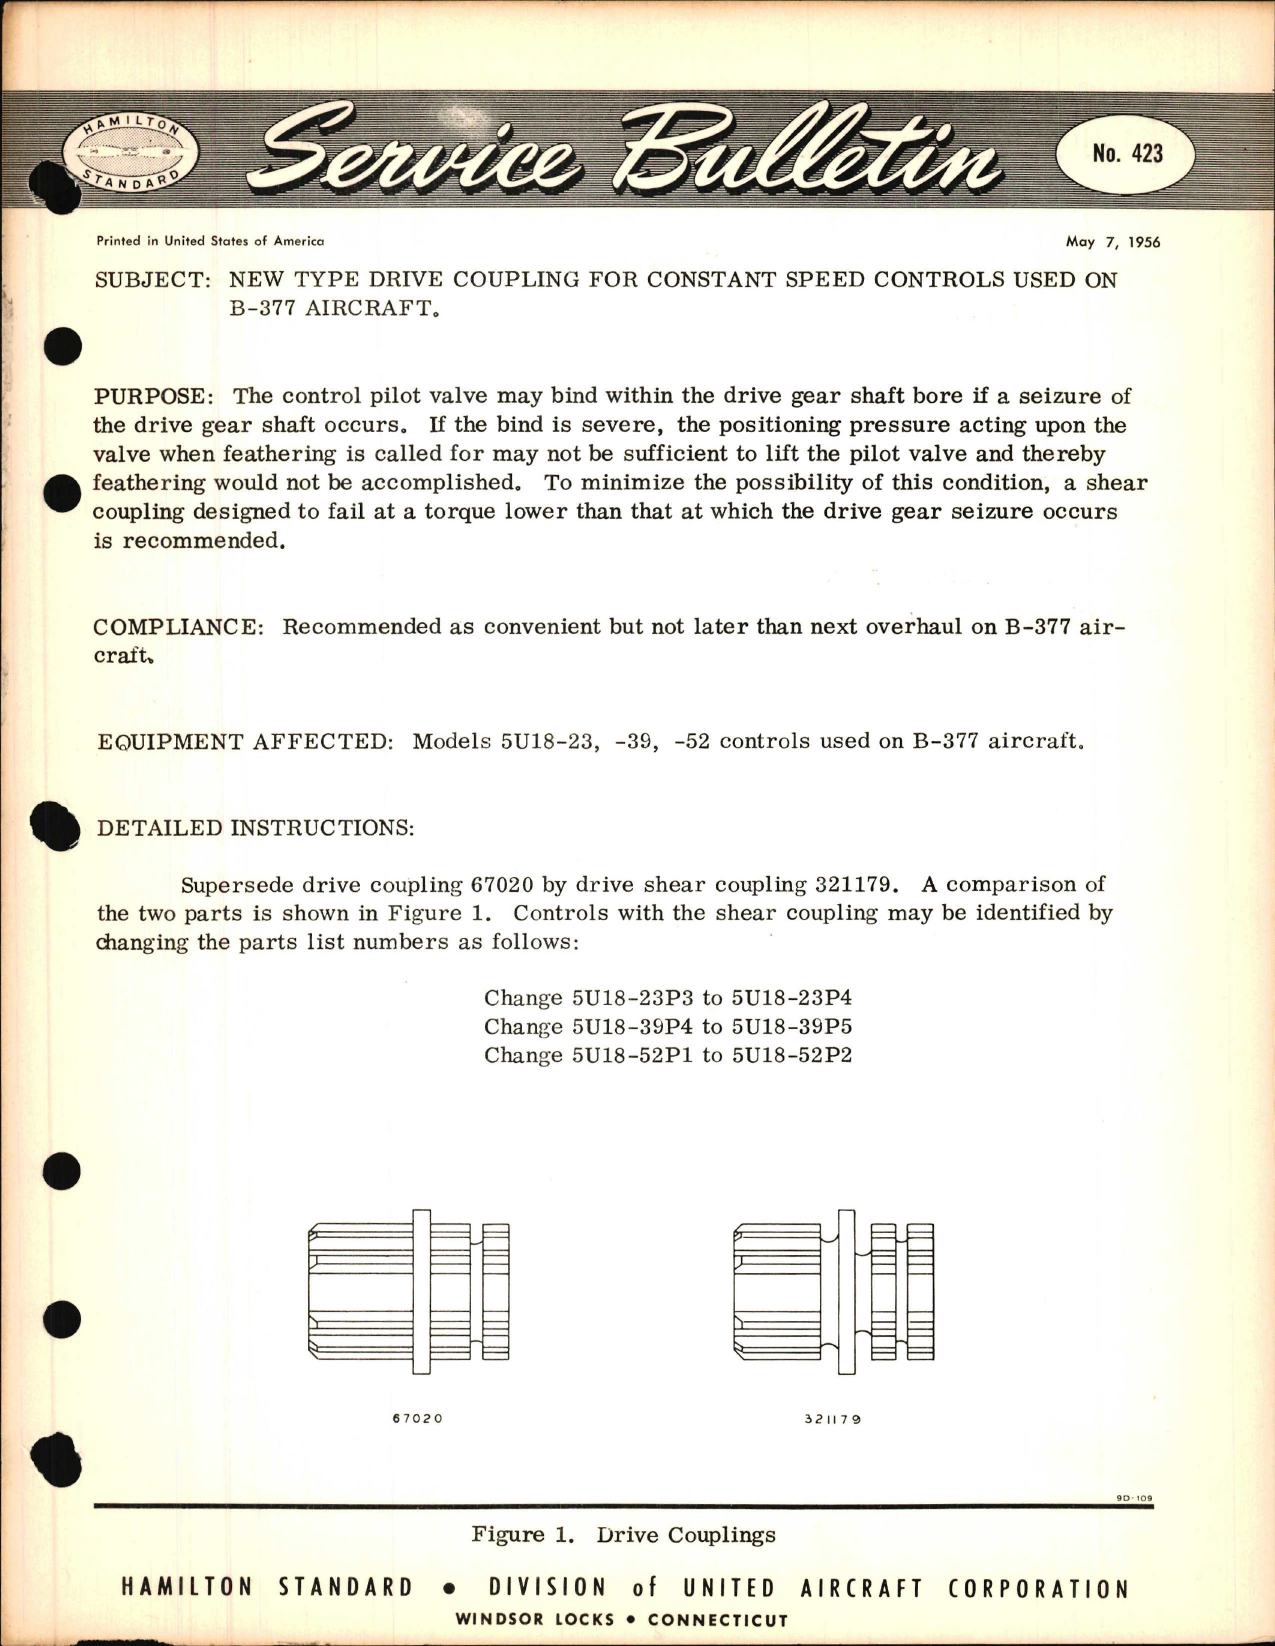 Sample page 1 from AirCorps Library document: New Type Drive Coupling for Constant Speed Controls Used on B-377 Aircraft